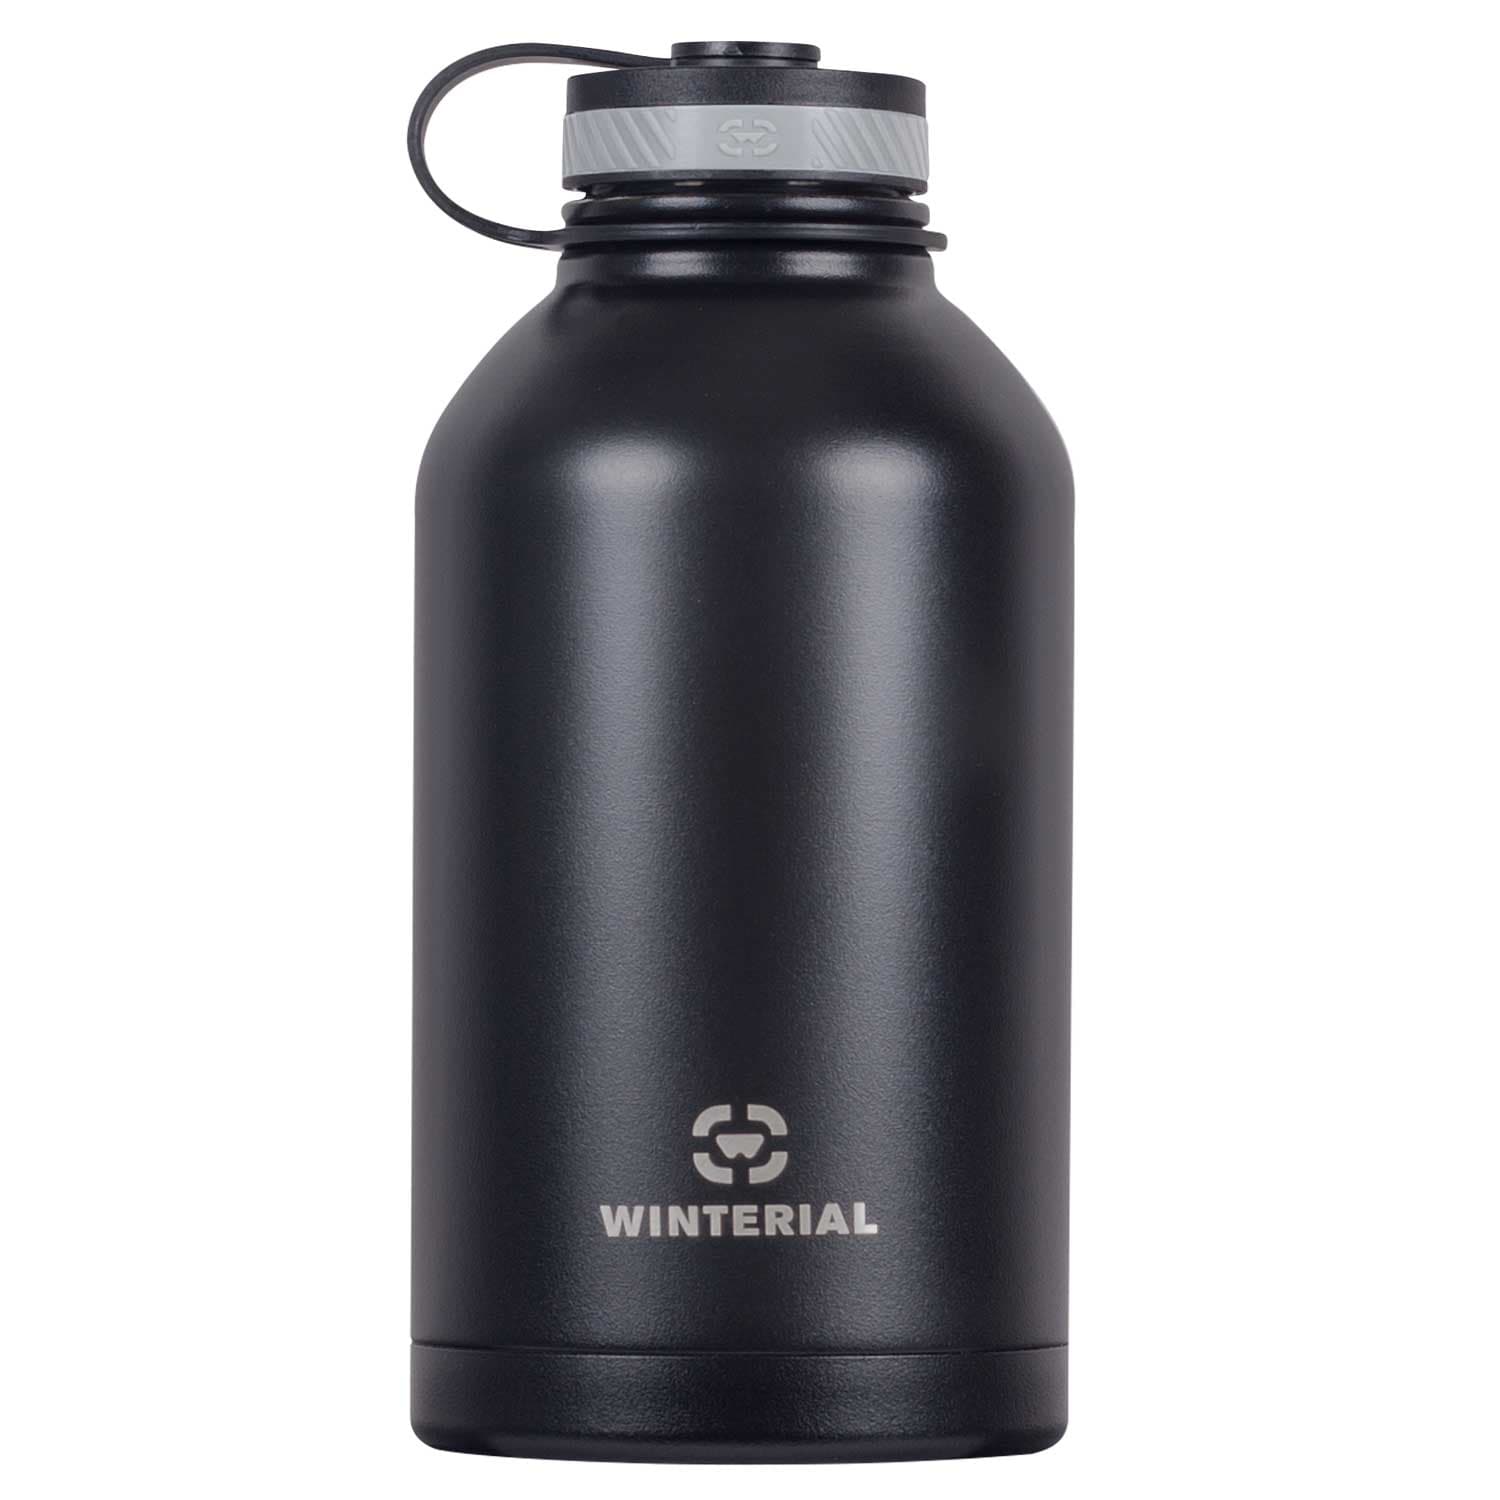 https://ak1.ostkcdn.com/images/products/is/images/direct/3c8f6349b2cbf927d2dd69dba2915129857ecd32/Winterial-64-oz-Insulated-Steel-Water-Bottle-and-Beer-Growler.-Double-Walled-Thermos-Flask.jpg